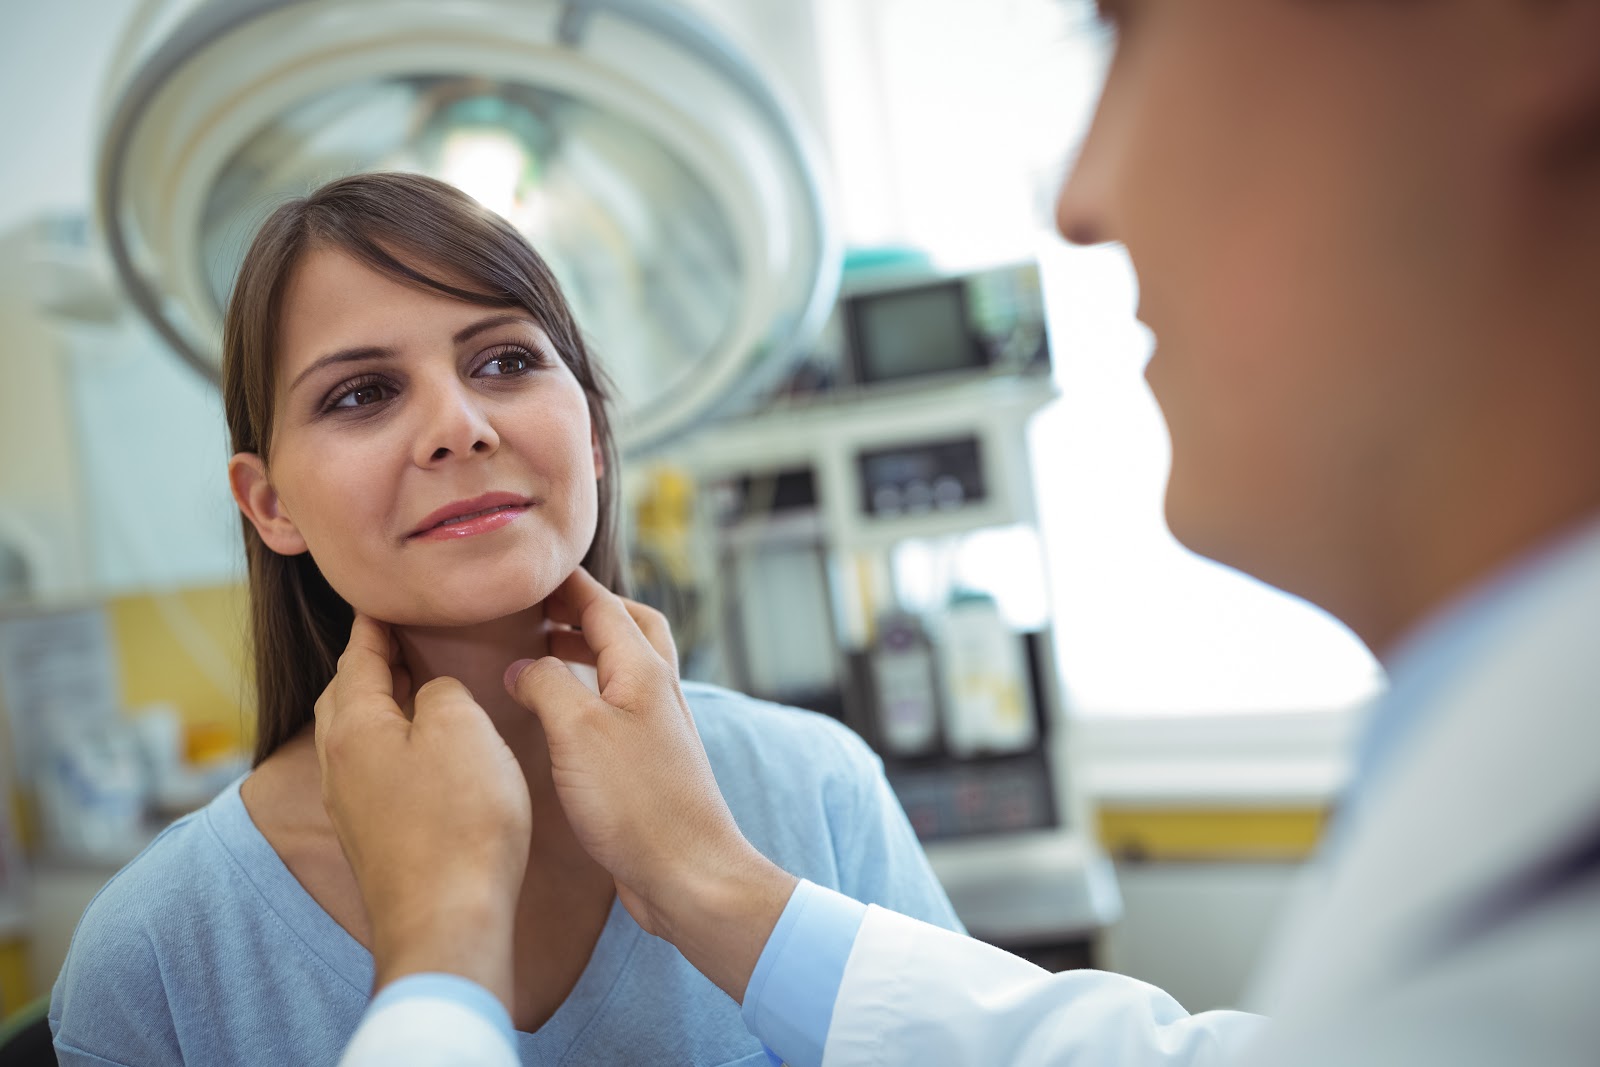 (An enlarged thyroid gland can be an indicator of hypothyroidism.)